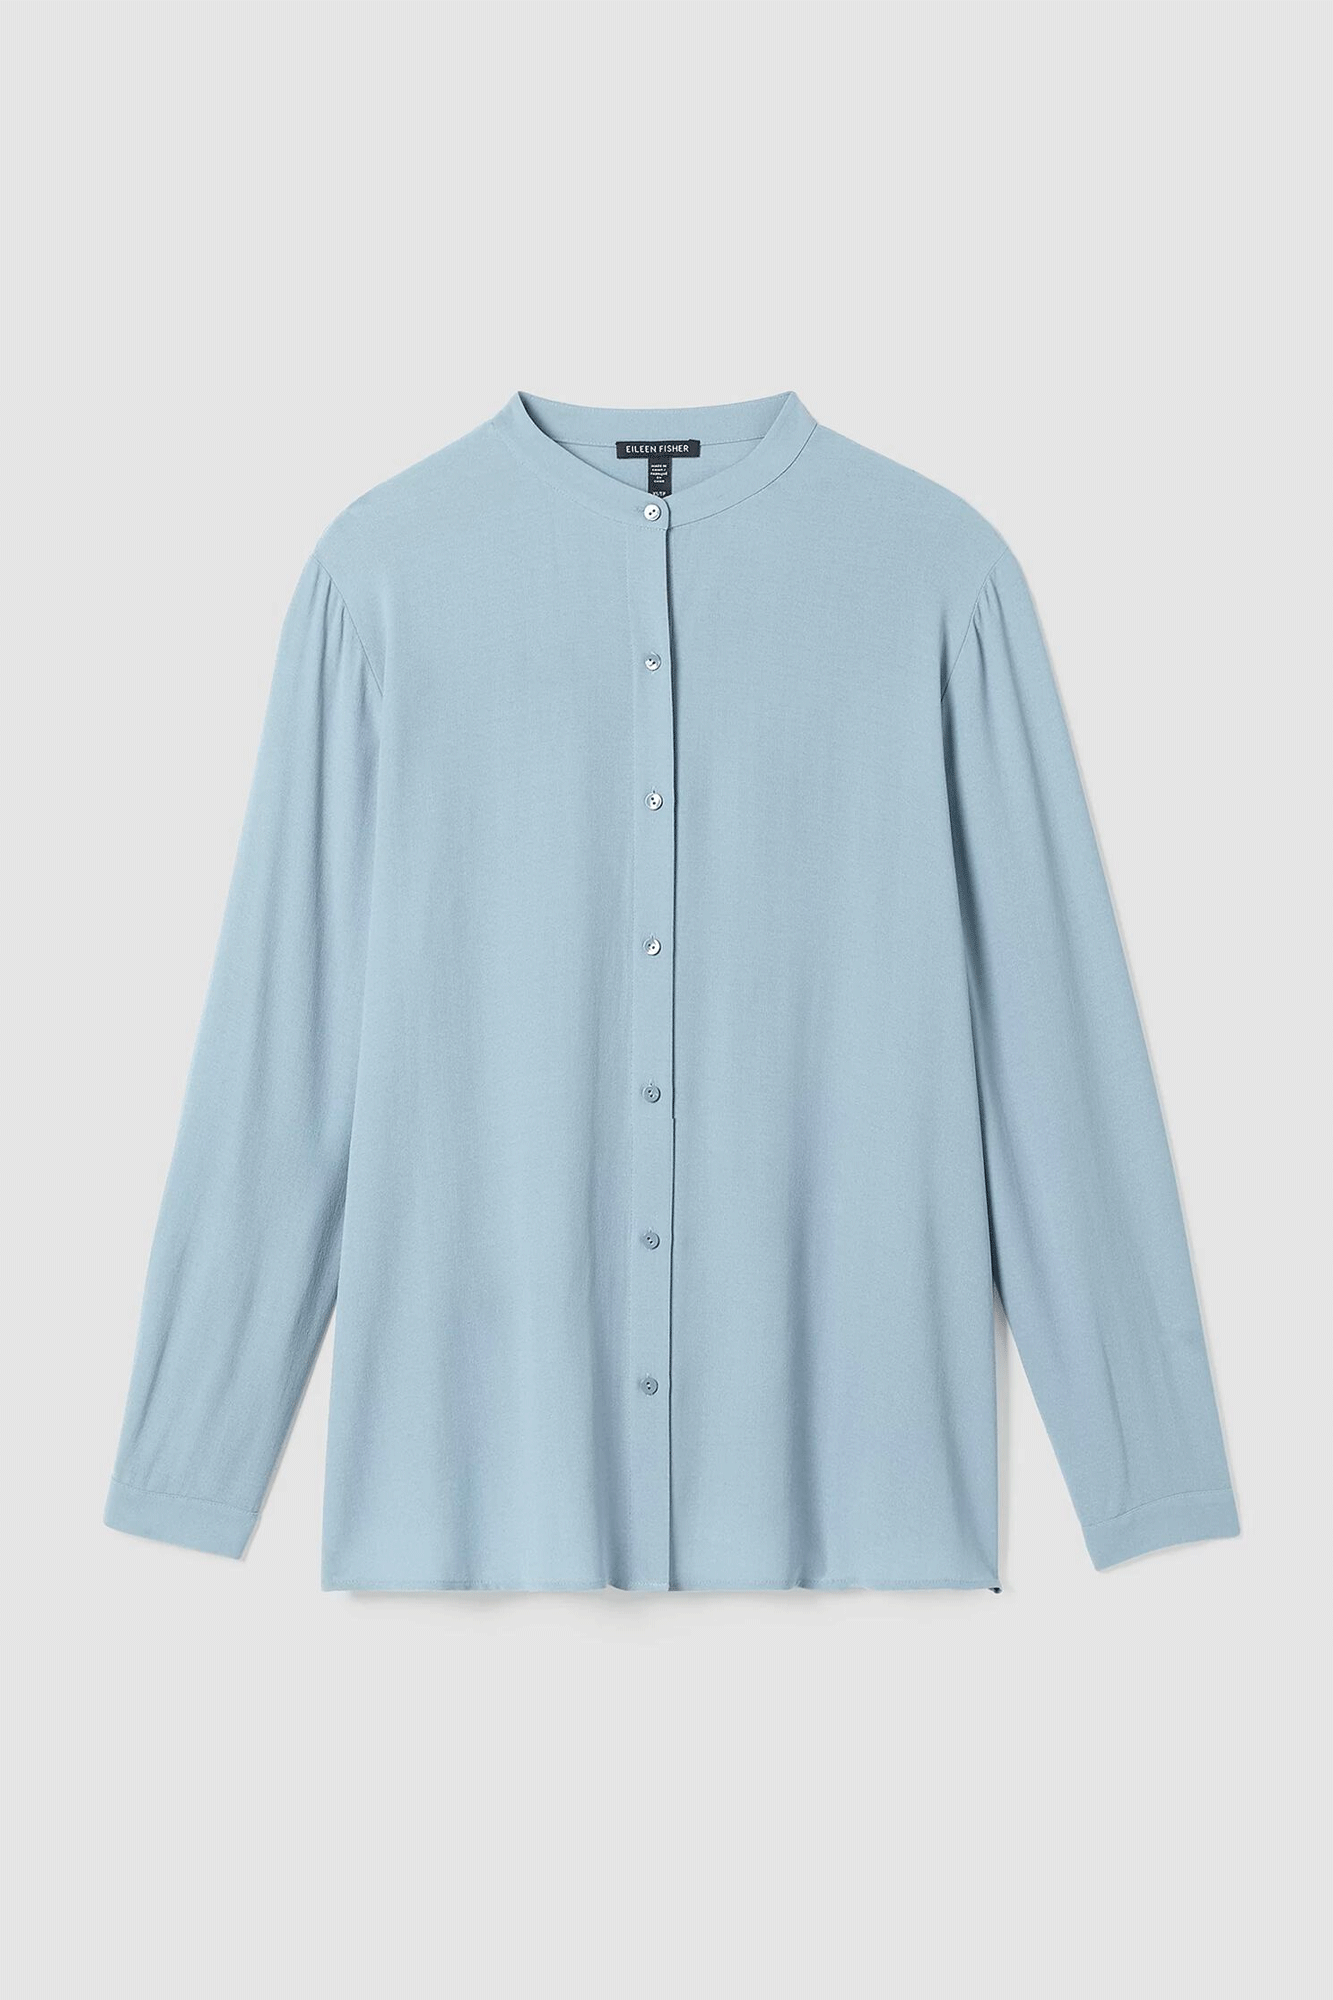 Experience effortless elegance with this Mandarin Collar Long Shirt from Eileen Fisher. Crafted from our signature Silk Georgette Crepe, this stylish piece is designed with a button-front shirt and understated neckline. Perfect for day or night looks.